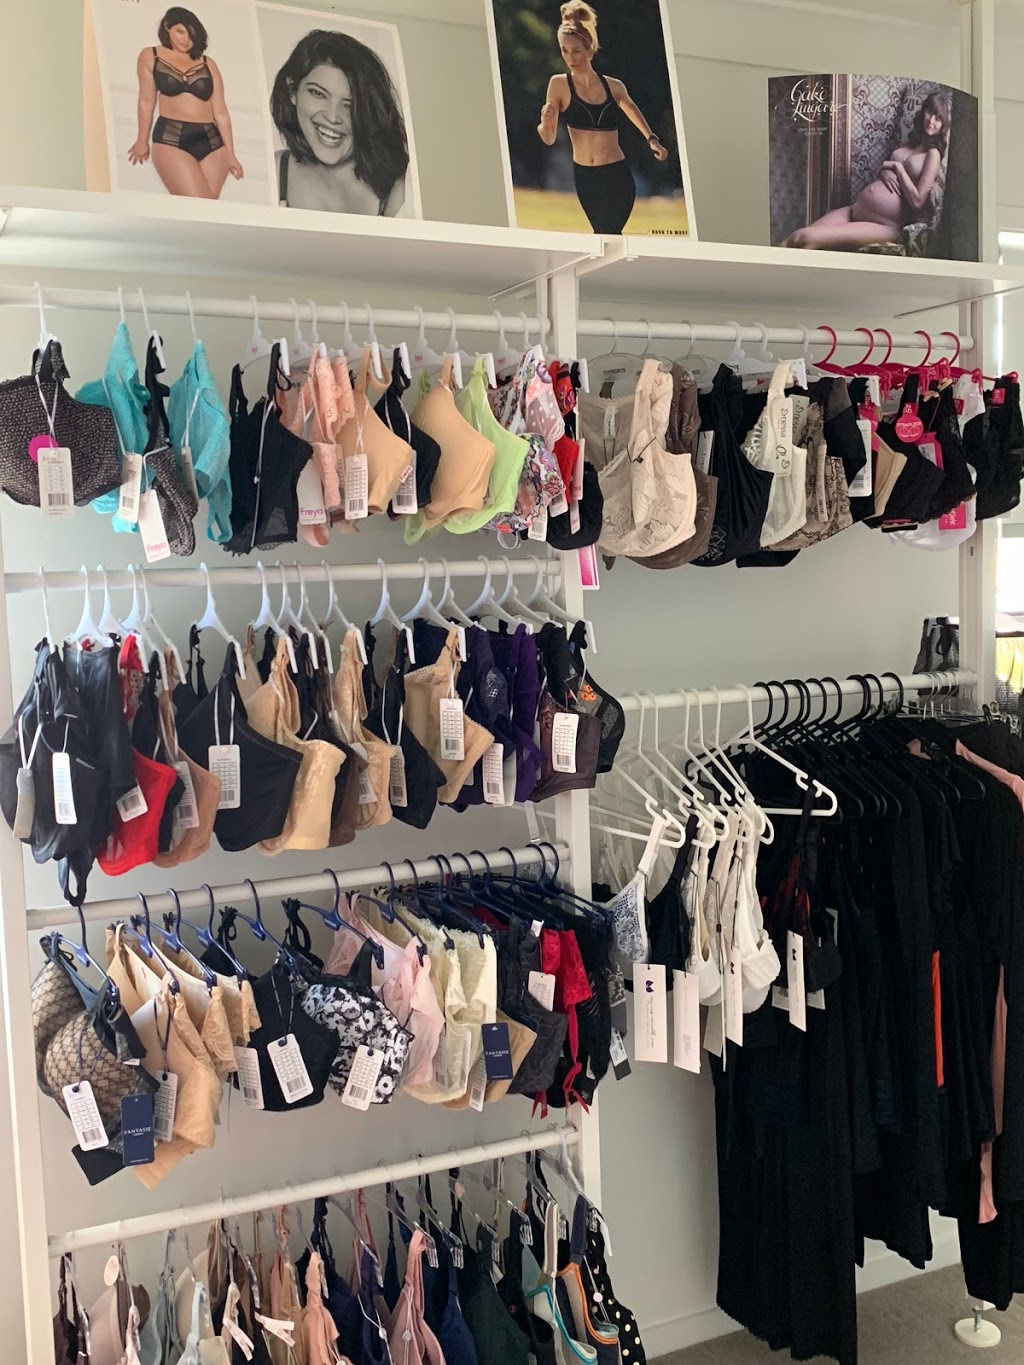 Le Buste Lingerie | clothing store | Brook St, Wakerley QLD 4154, Australia | 0424526427 OR +61 424 526 427